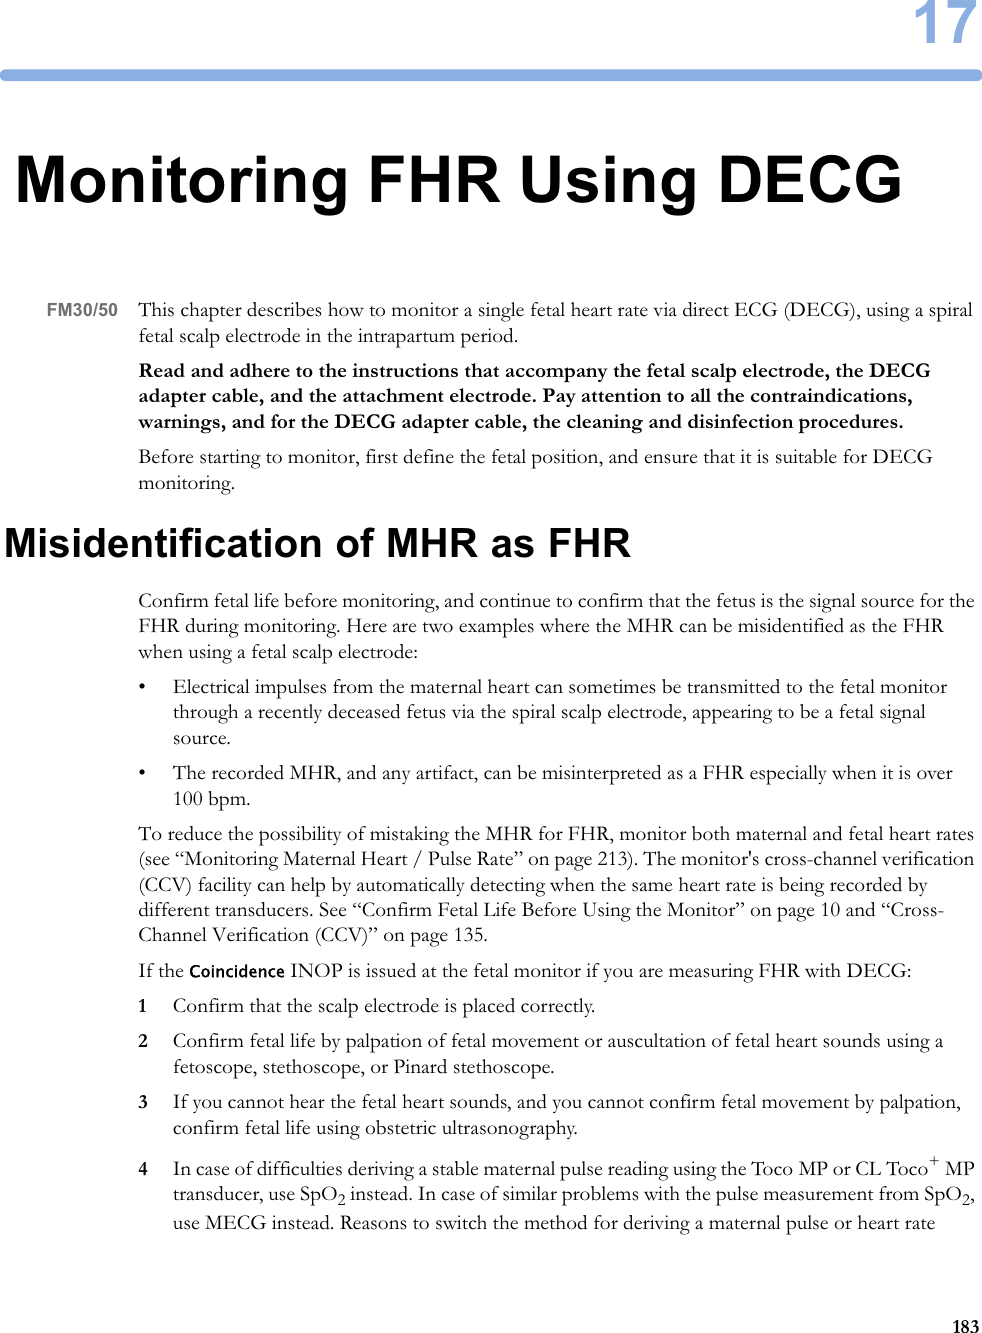 1718317Monitoring FHR Using DECGFM30/50 This chapter describes how to monitor a single fetal heart rate via direct ECG (DECG), using a spiral fetal scalp electrode in the intrapartum period.Read and adhere to the instructions that accompany the fetal scalp electrode, the DECG adapter cable, and the attachment electrode. Pay attention to all the contraindications, warnings, and for the DECG adapter cable, the cleaning and disinfection procedures.Before starting to monitor, first define the fetal position, and ensure that it is suitable for DECG monitoring.Misidentification of MHR as FHRConfirm fetal life before monitoring, and continue to confirm that the fetus is the signal source for the FHR during monitoring. Here are two examples where the MHR can be misidentified as the FHR when using a fetal scalp electrode:• Electrical impulses from the maternal heart can sometimes be transmitted to the fetal monitor through a recently deceased fetus via the spiral scalp electrode, appearing to be a fetal signal source.• The recorded MHR, and any artifact, can be misinterpreted as a FHR especially when it is over 100 bpm.To reduce the possibility of mistaking the MHR for FHR, monitor both maternal and fetal heart rates (see “Monitoring Maternal Heart / Pulse Rate” on page 213). The monitor&apos;s cross-channel verification (CCV) facility can help by automatically detecting when the same heart rate is being recorded by different transducers. See “Confirm Fetal Life Before Using the Monitor” on page 10 and “Cross-Channel Verification (CCV)” on page 135.If the Coincidence INOP is issued at the fetal monitor if you are measuring FHR with DECG:1Confirm that the scalp electrode is placed correctly.2Confirm fetal life by palpation of fetal movement or auscultation of fetal heart sounds using a fetoscope, stethoscope, or Pinard stethoscope. 3If you cannot hear the fetal heart sounds, and you cannot confirm fetal movement by palpation, confirm fetal life using obstetric ultrasonography.4In case of difficulties deriving a stable maternal pulse reading using the Toco MP or CL Toco+ MP transducer, use SpO2 instead. In case of similar problems with the pulse measurement from SpO2, use MECG instead. Reasons to switch the method for deriving a maternal pulse or heart rate 